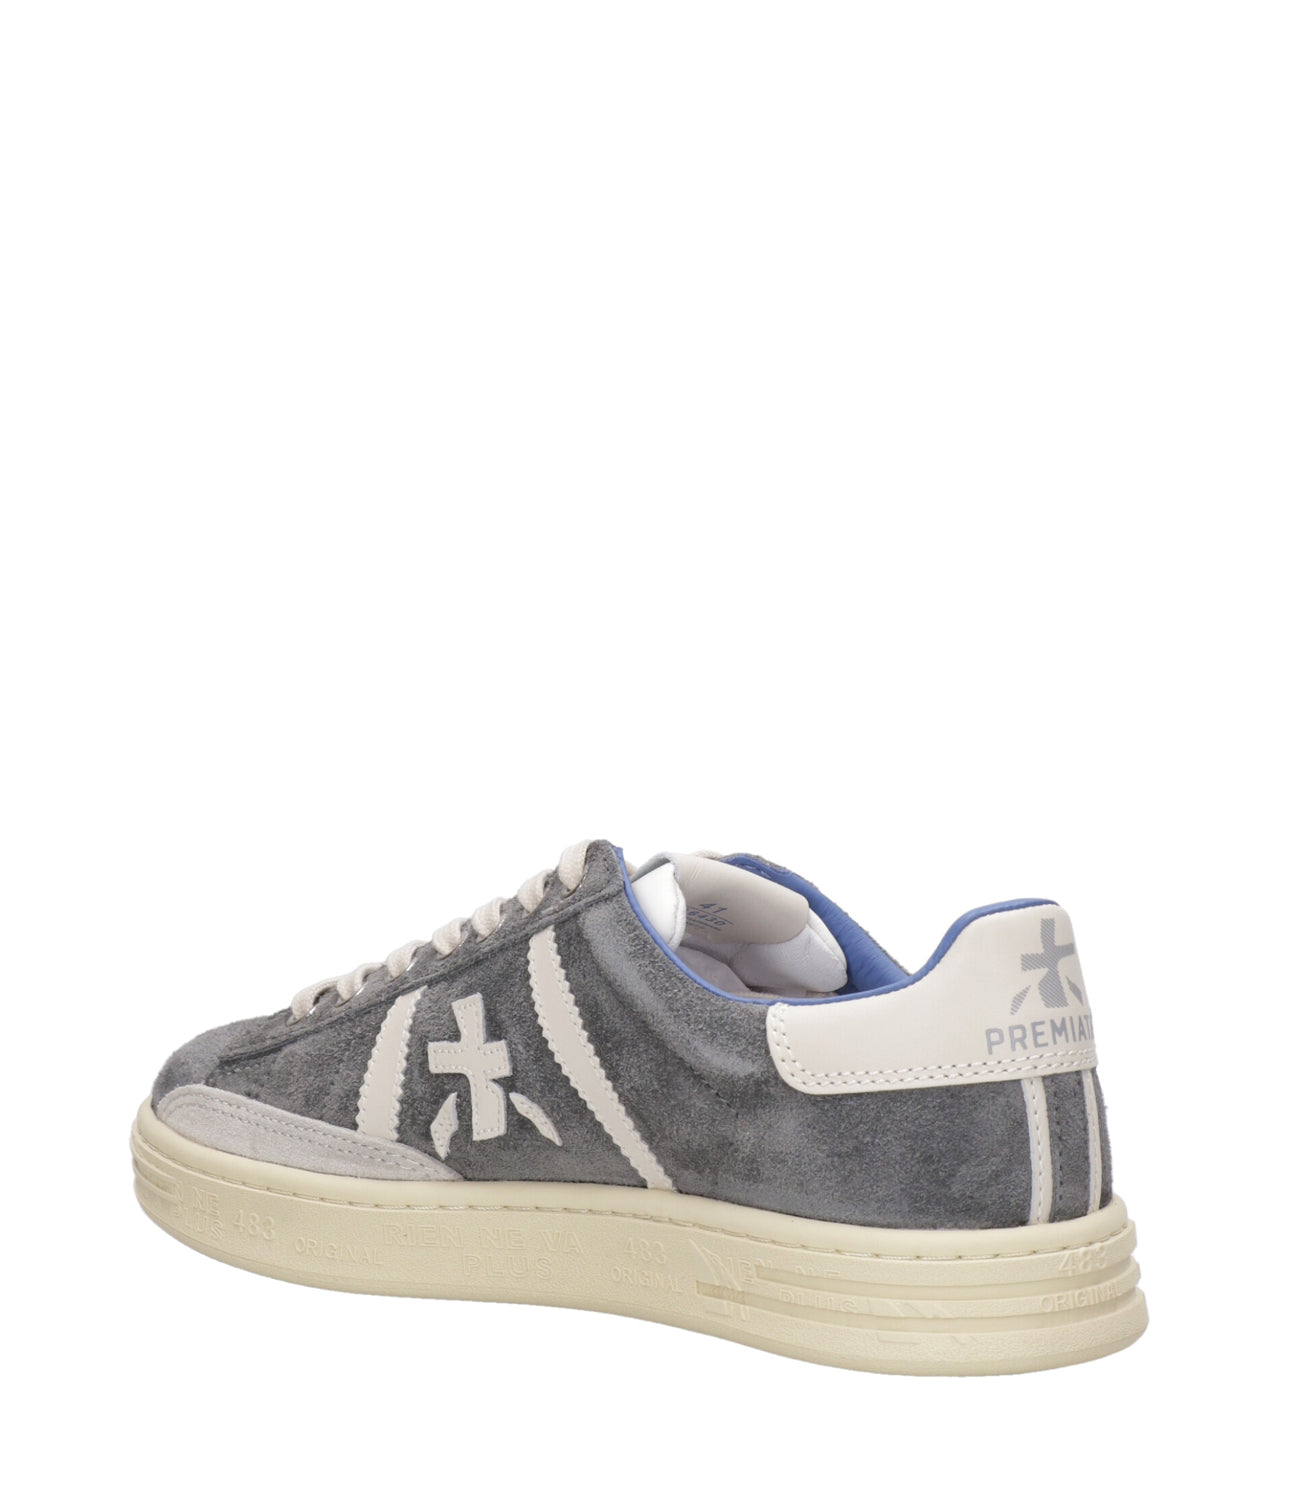 Premiata | Russel Grey and White Sneakers